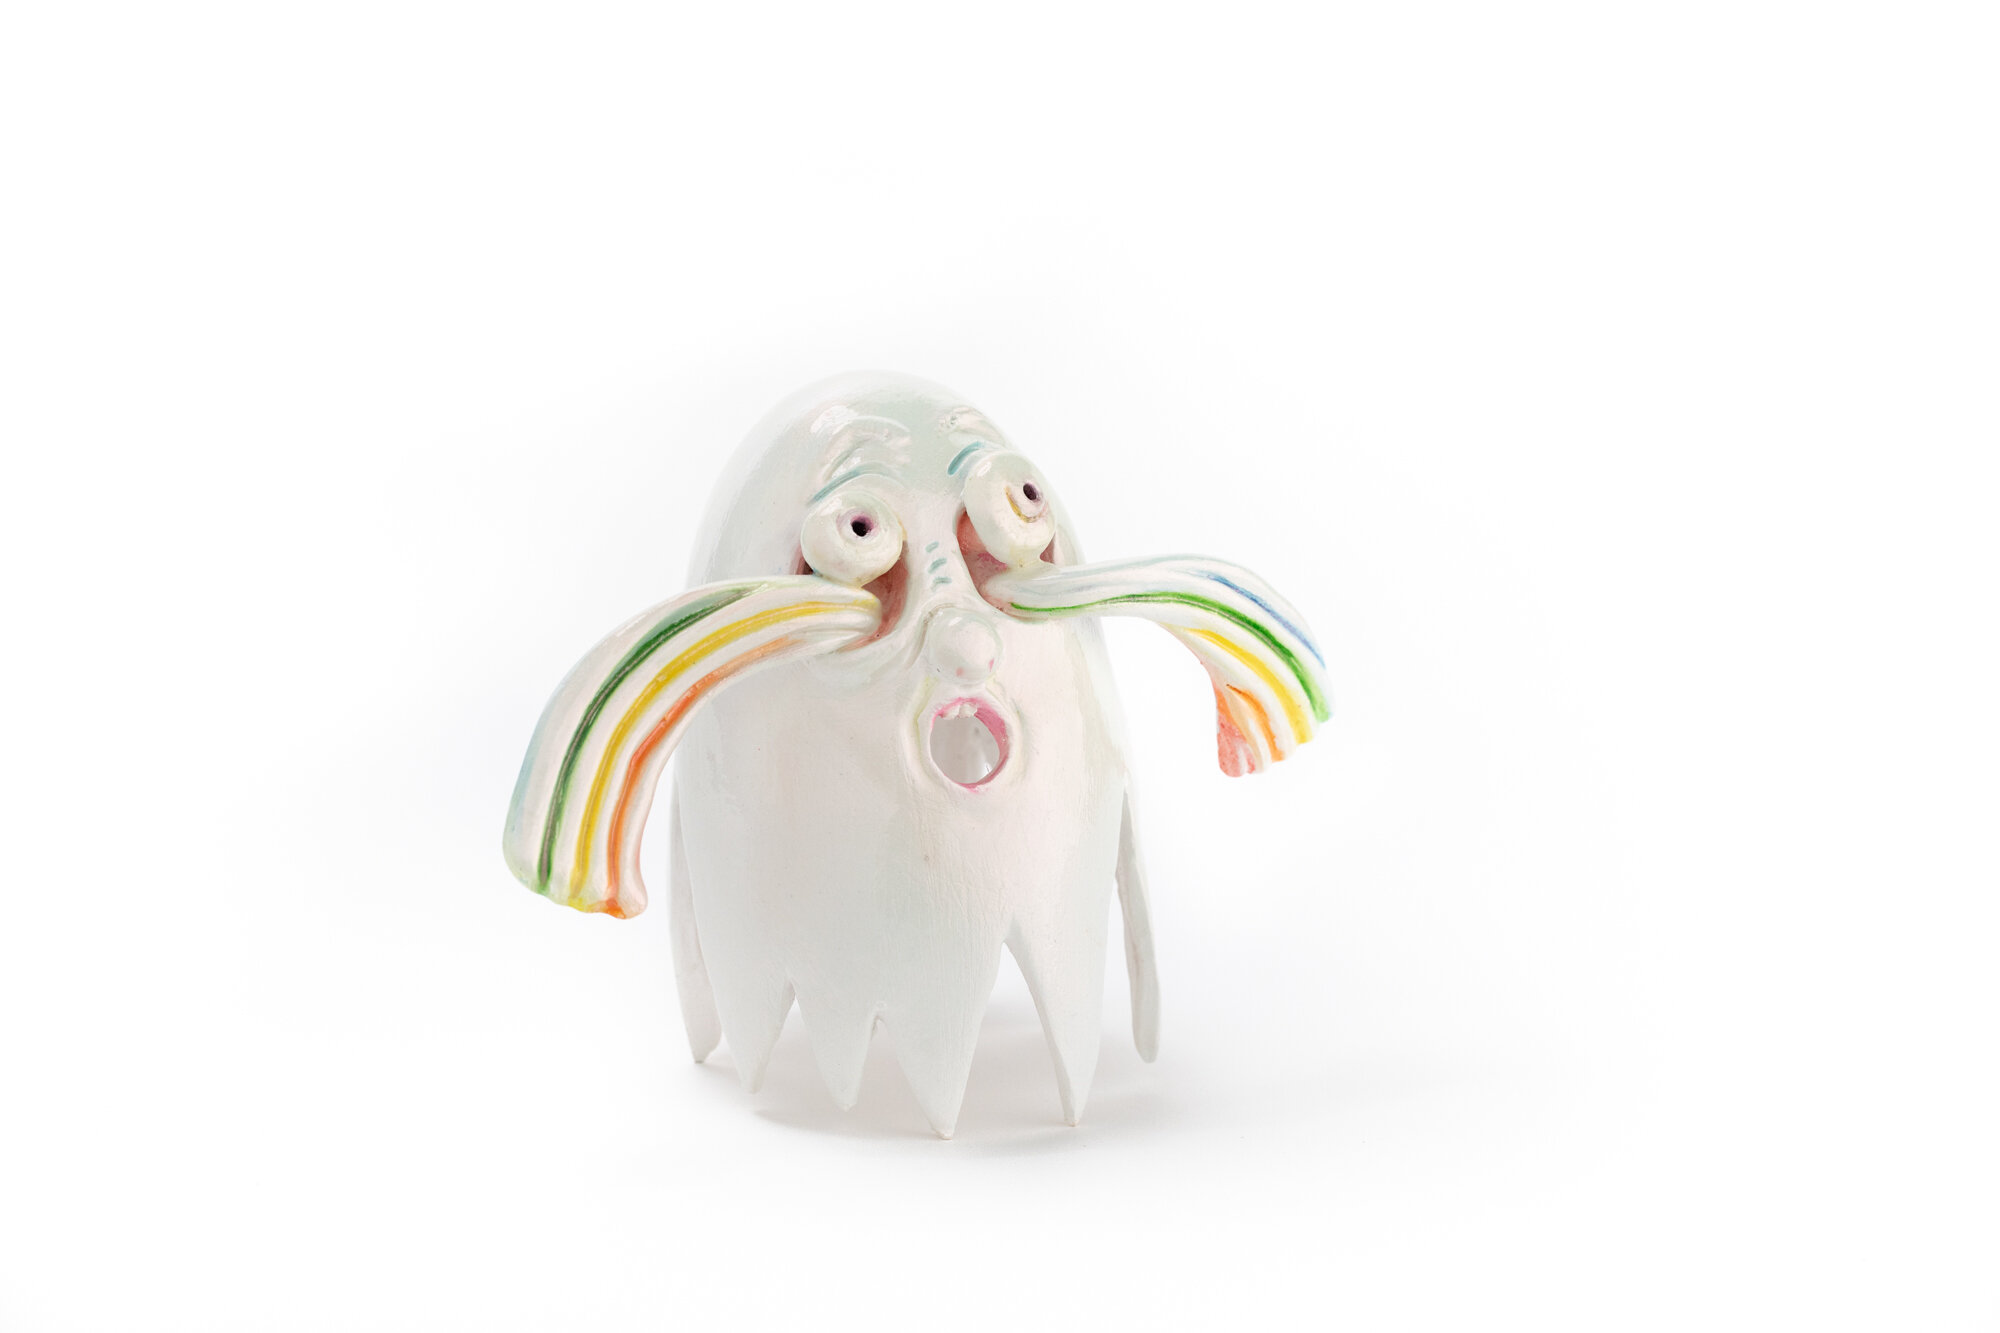 Painted ceramic sculpture of a ghost crying rainbow tears.